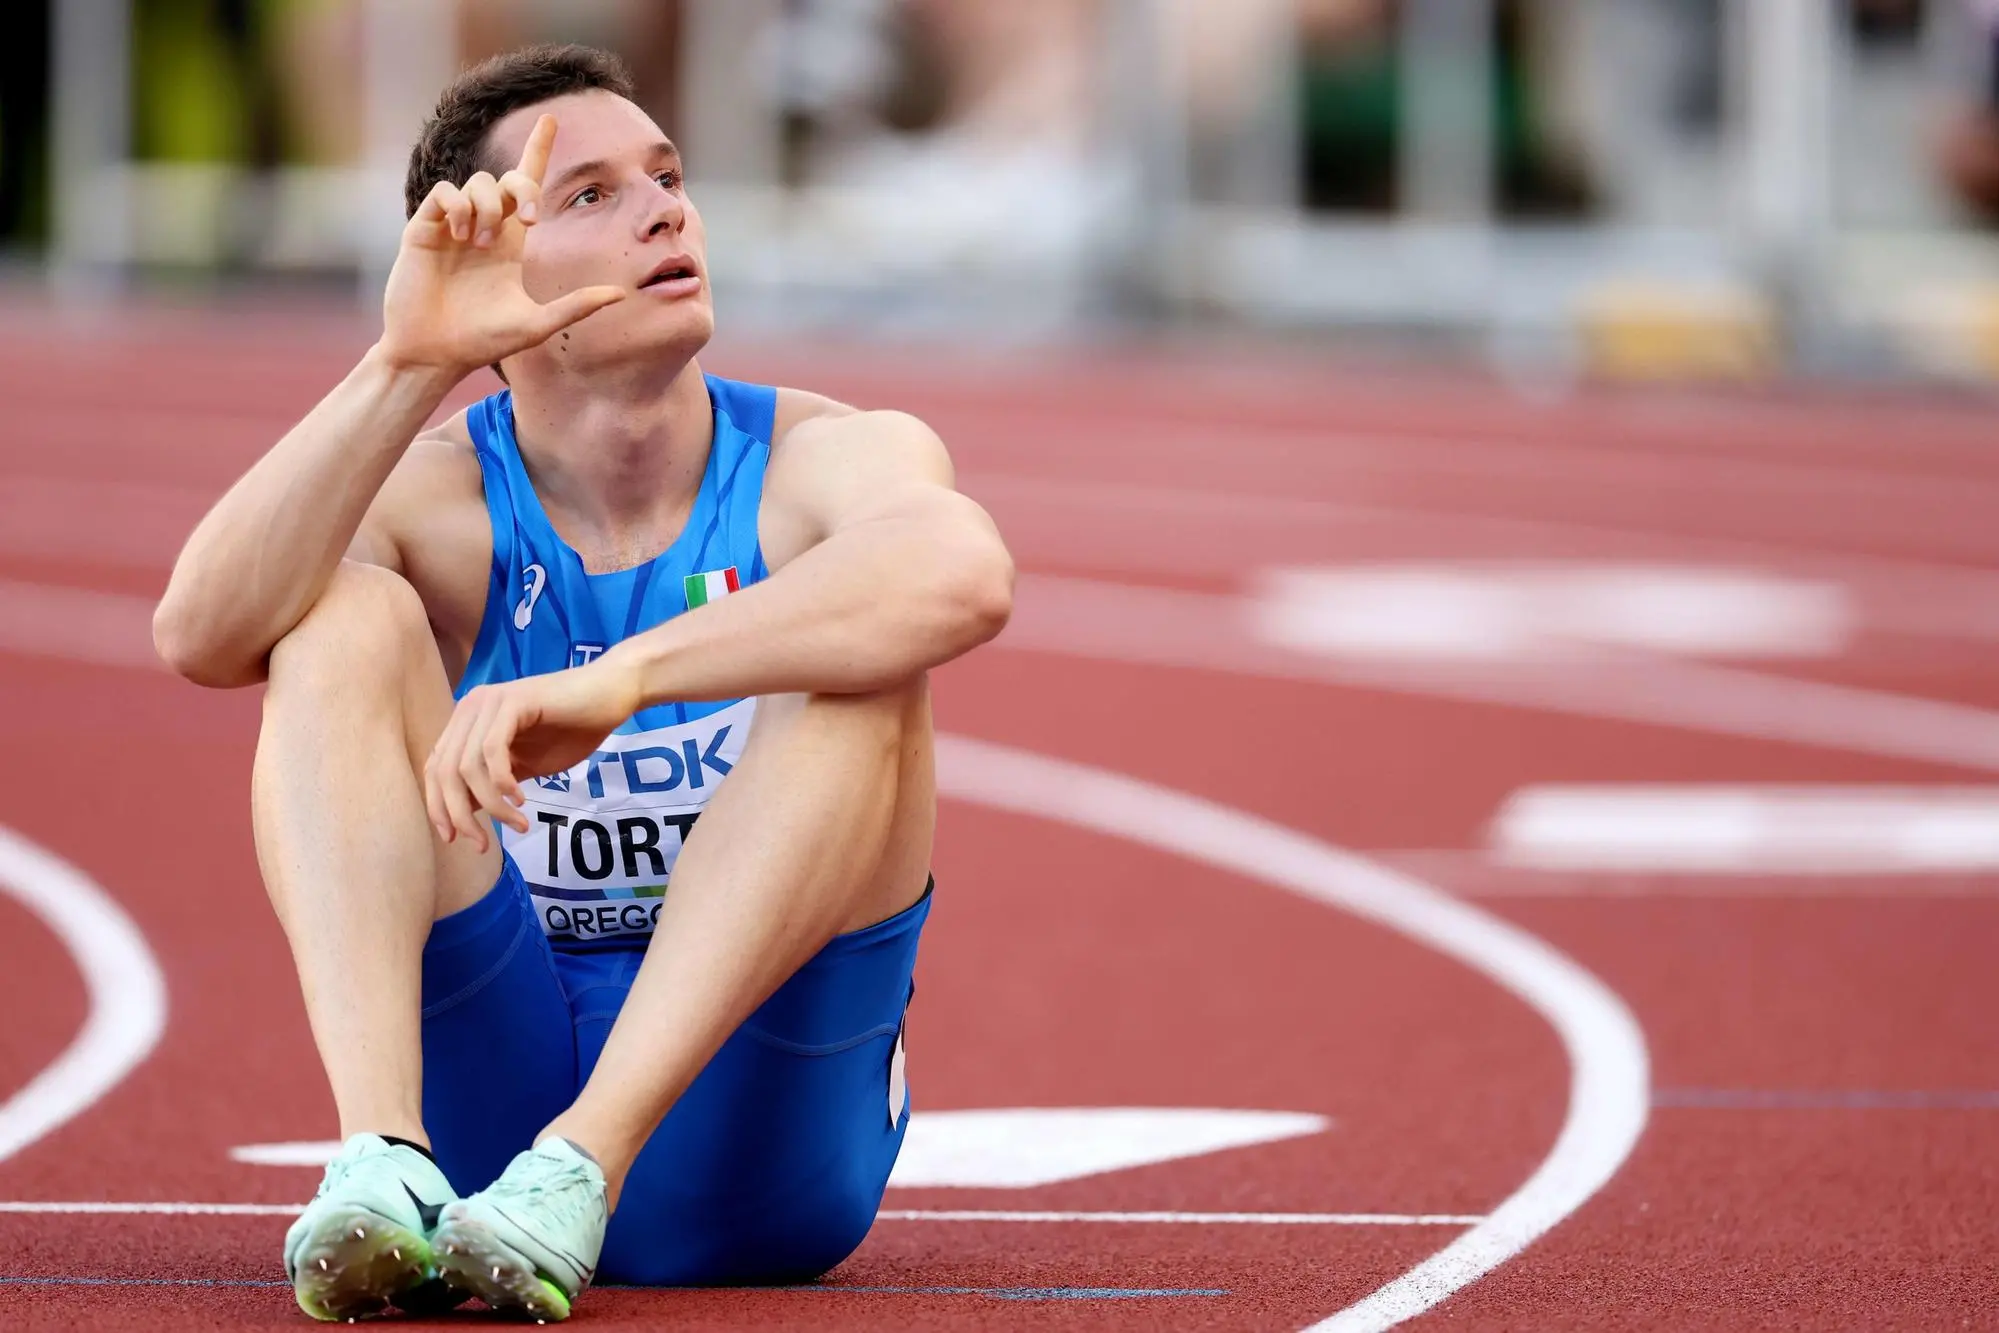 EUGENE, OREGON - JULY 19: Filippo Tortu of Team Italy reacts after competing in the Men's 200m Semi-Final on day five of the World Athletics Championships Oregon22 at Hayward Field on July 19, 2022 in Eugene, Oregon. Christian Petersen/Getty Images/AFP == FOR NEWSPAPERS, INTERNET, TELCOS & TELEVISION USE ONLY ==